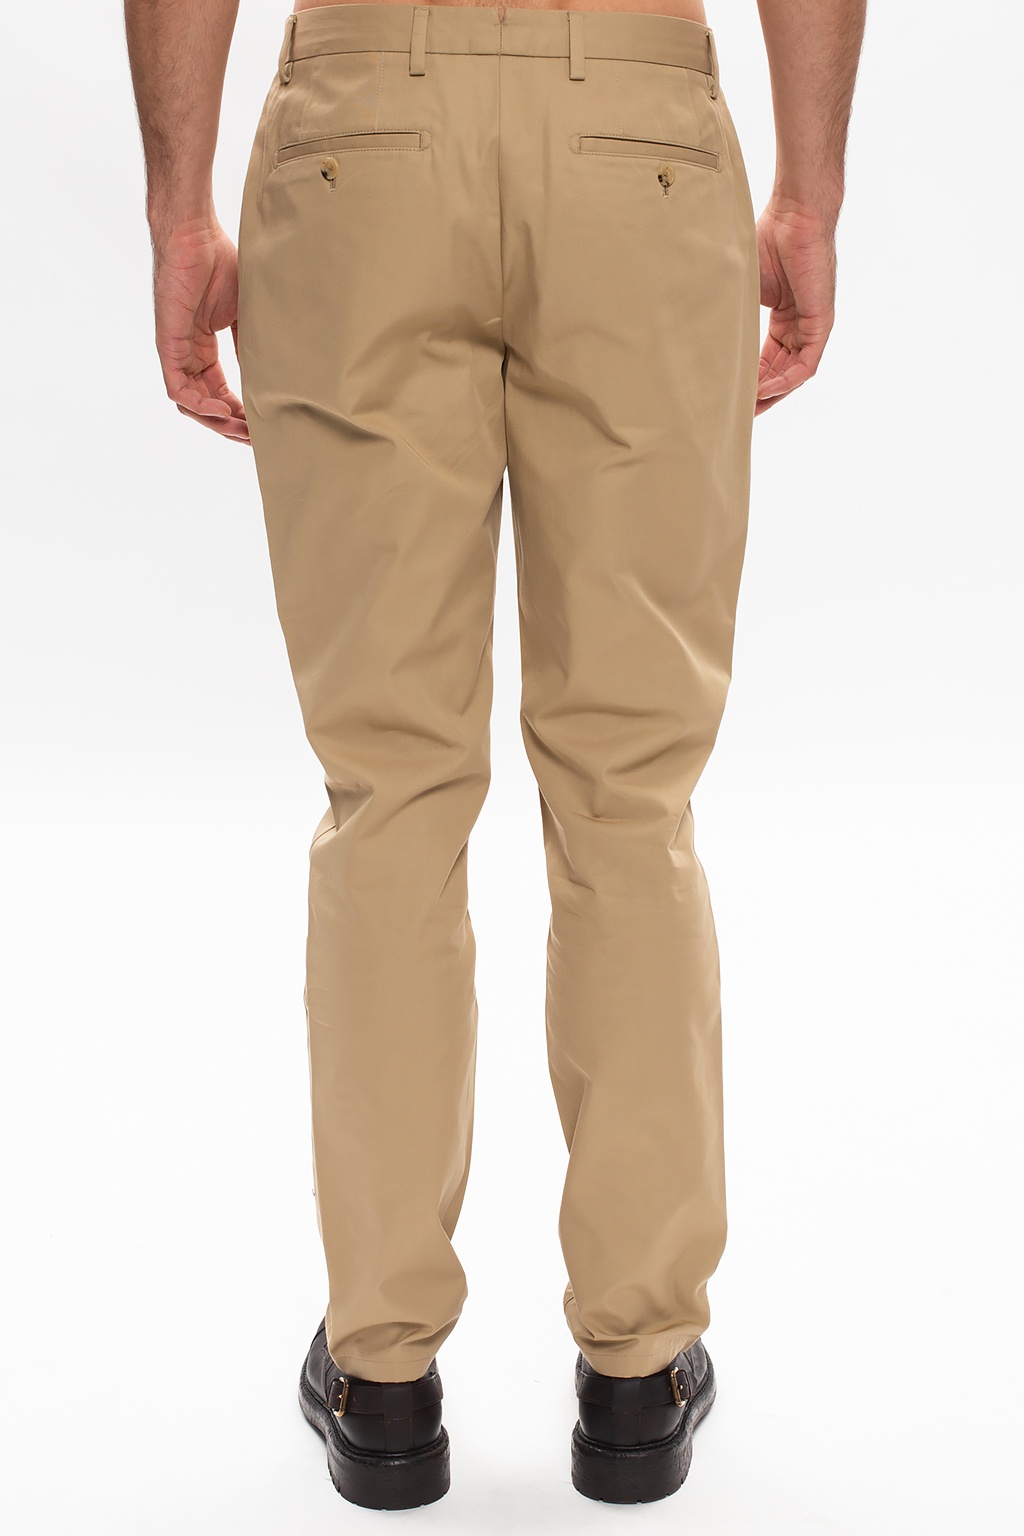 Burberry Cotton chino Stretch trousers